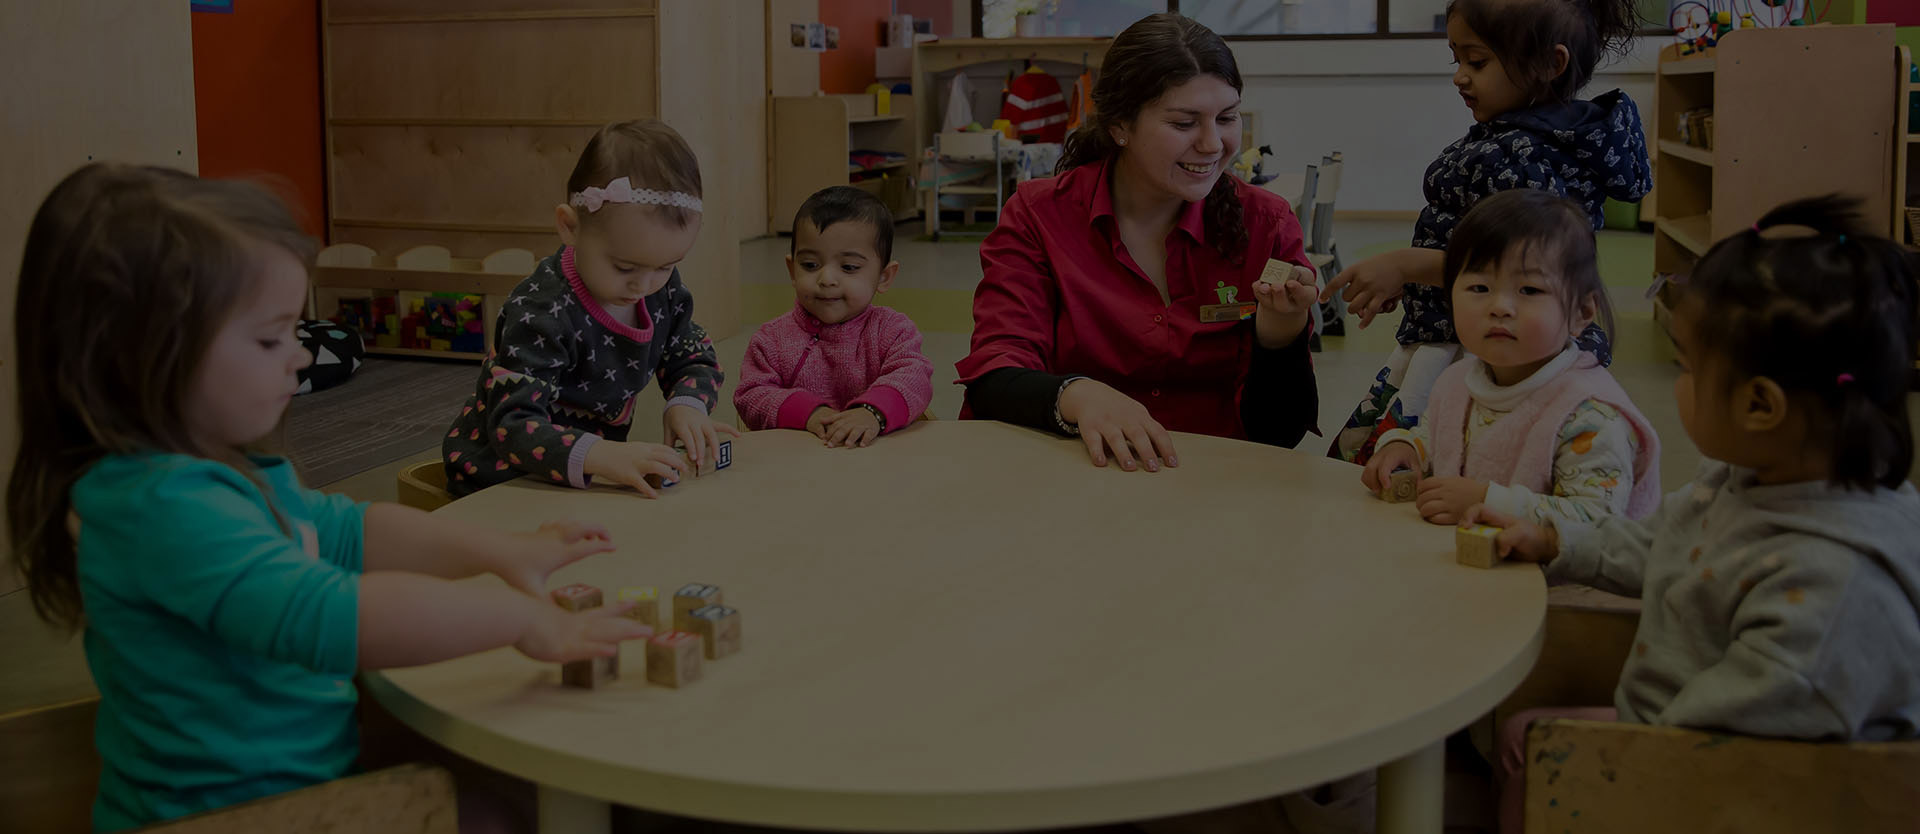 Reggio Emilia Childcare Centres | Learning Styles: How Does Your Child Learn Best?